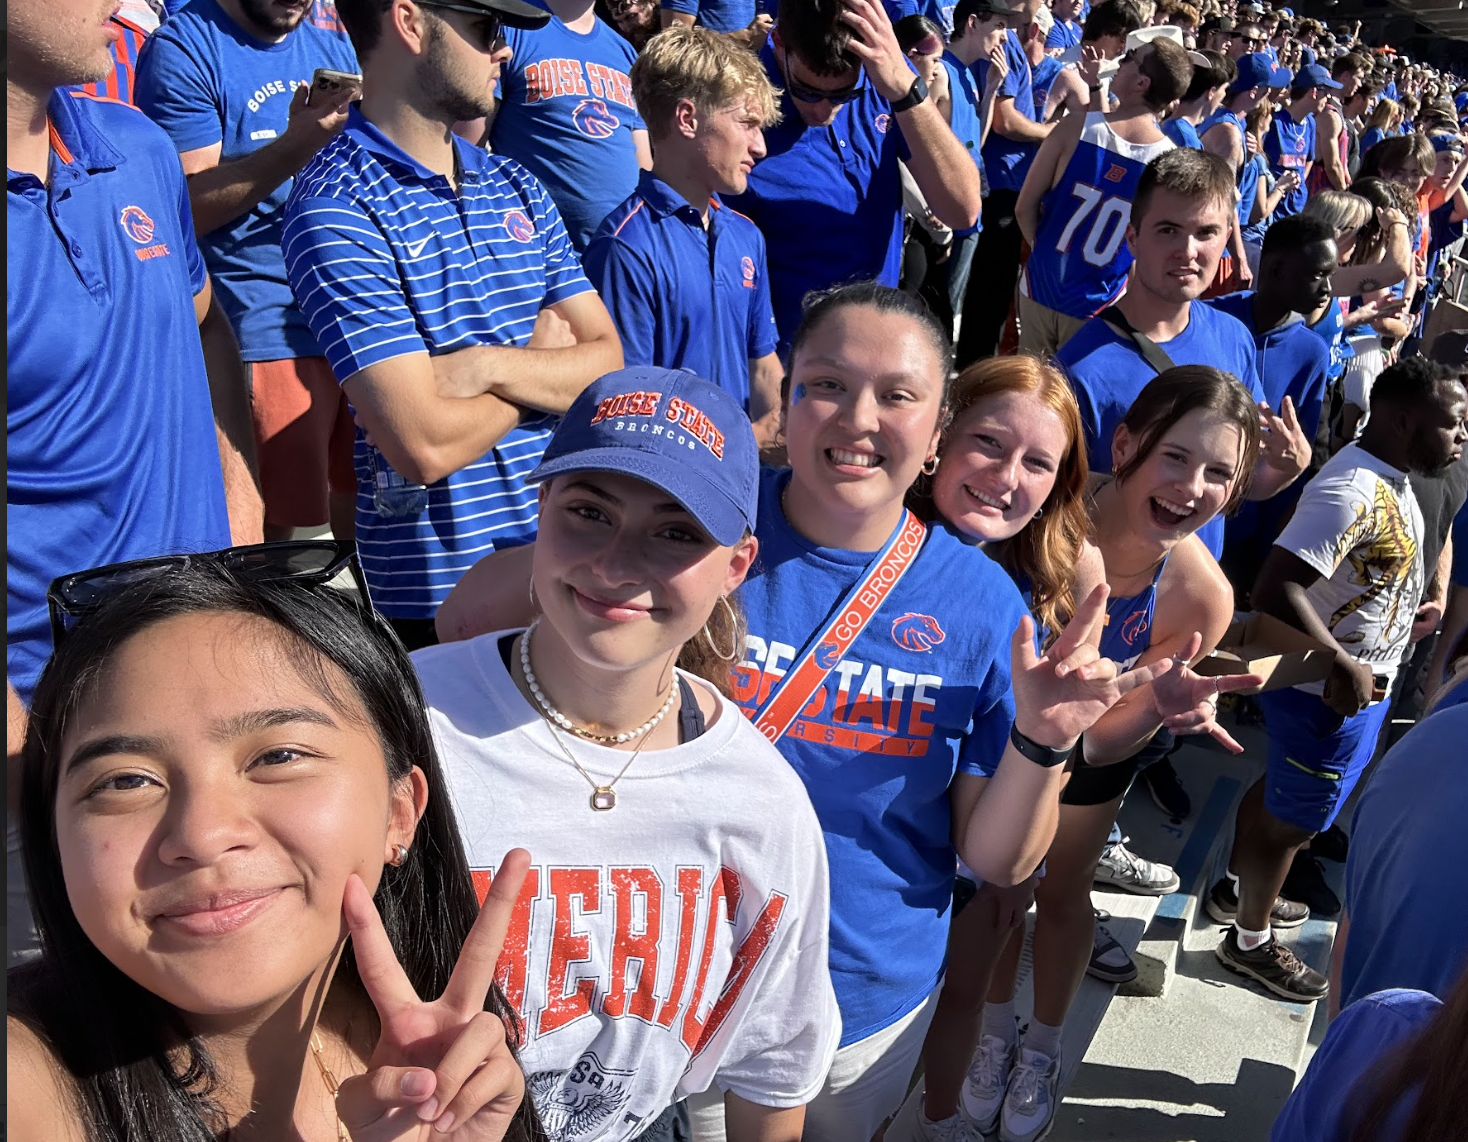 Chloe with friends at a Broncos football game